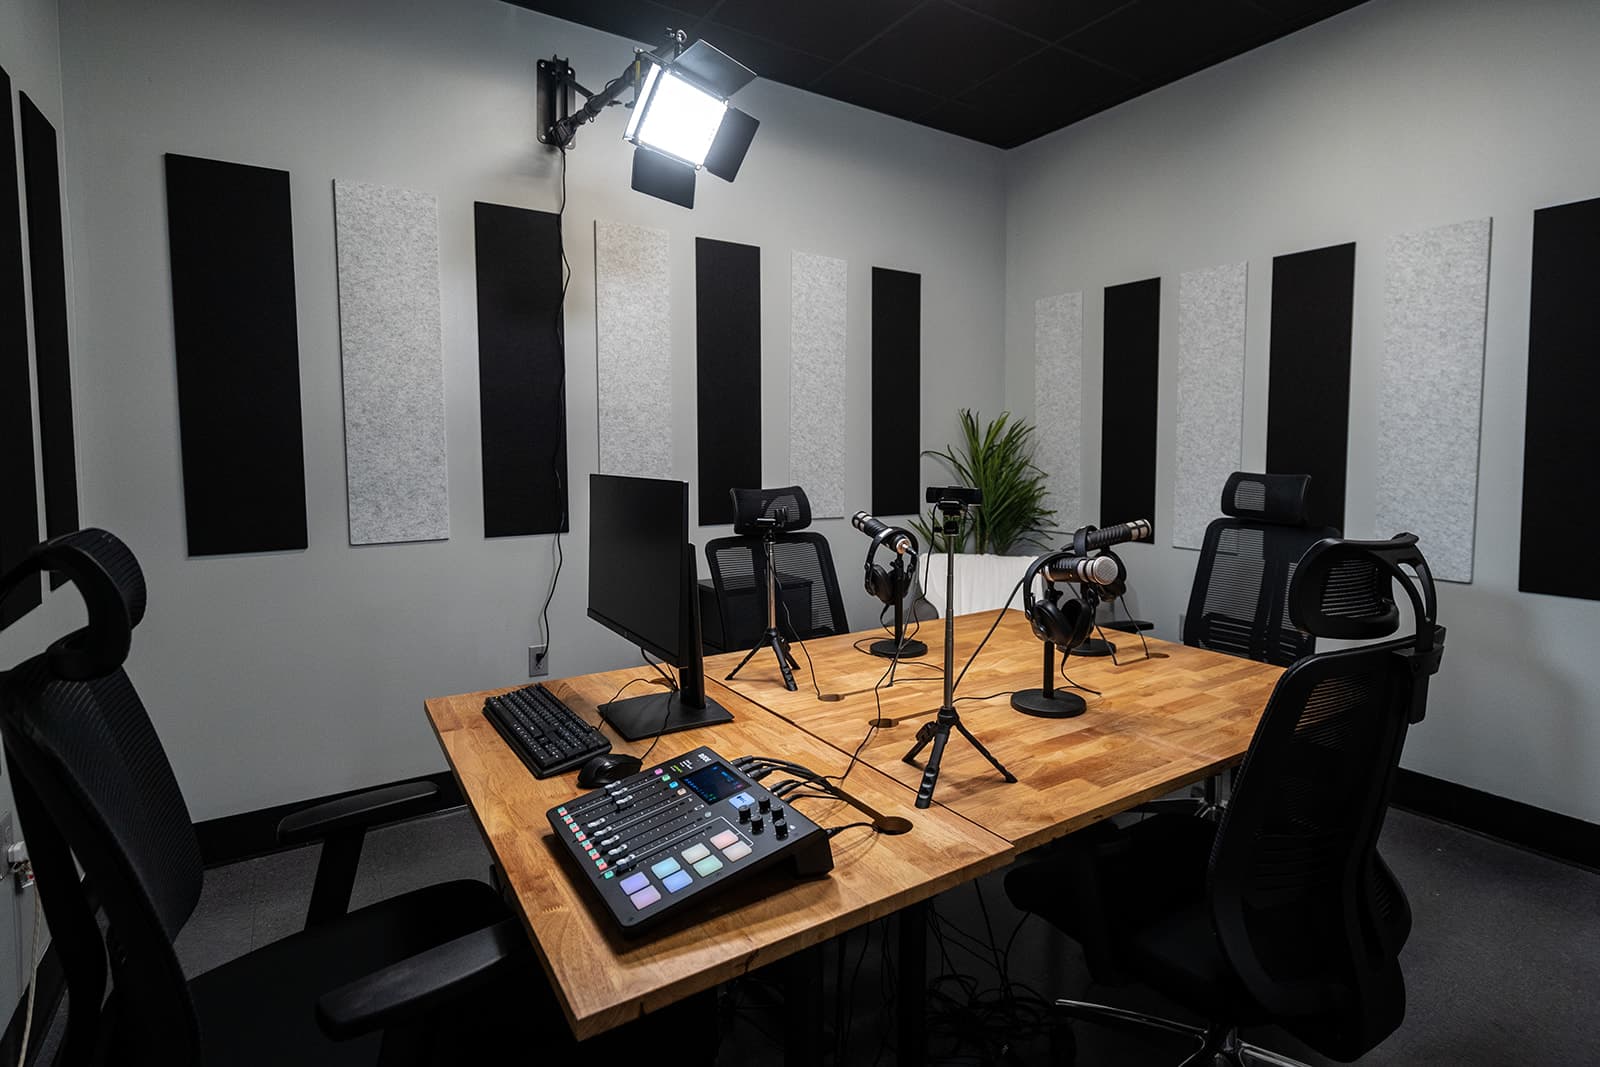 podcast room setup with soundproofing wall mountings